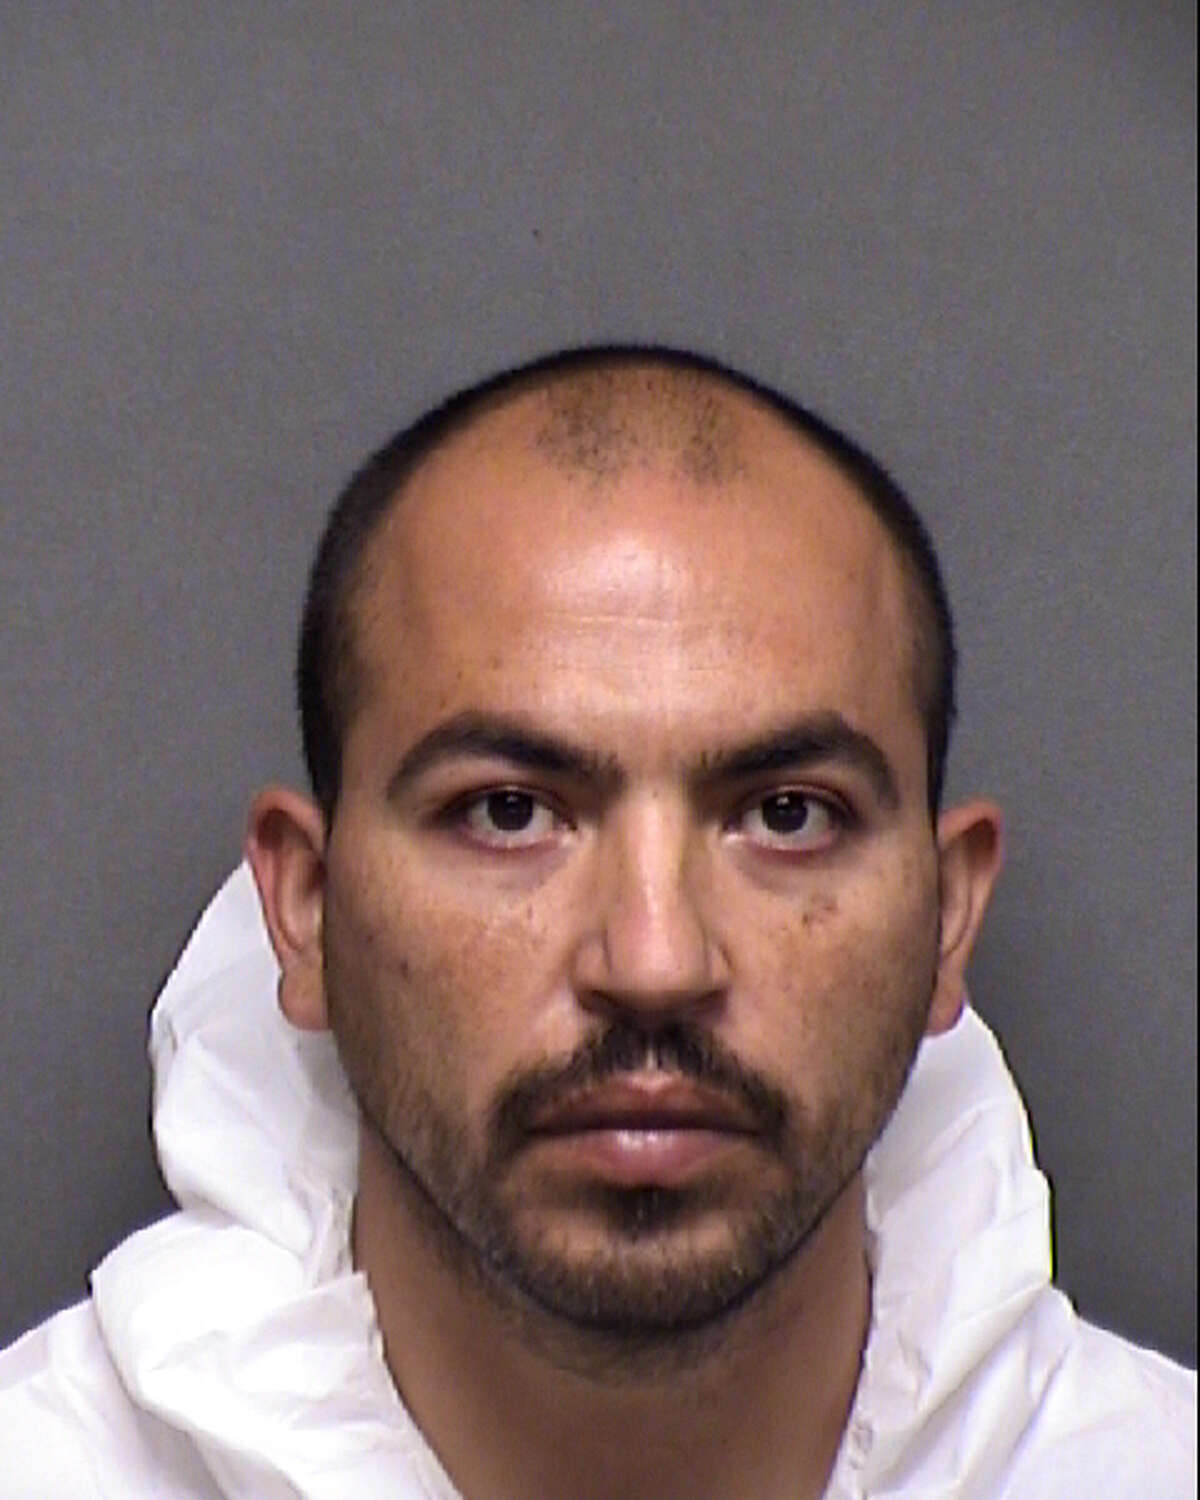 Alejandro Vargas, 39, was charged with murder after a fatal shooting on July 6, 2020.